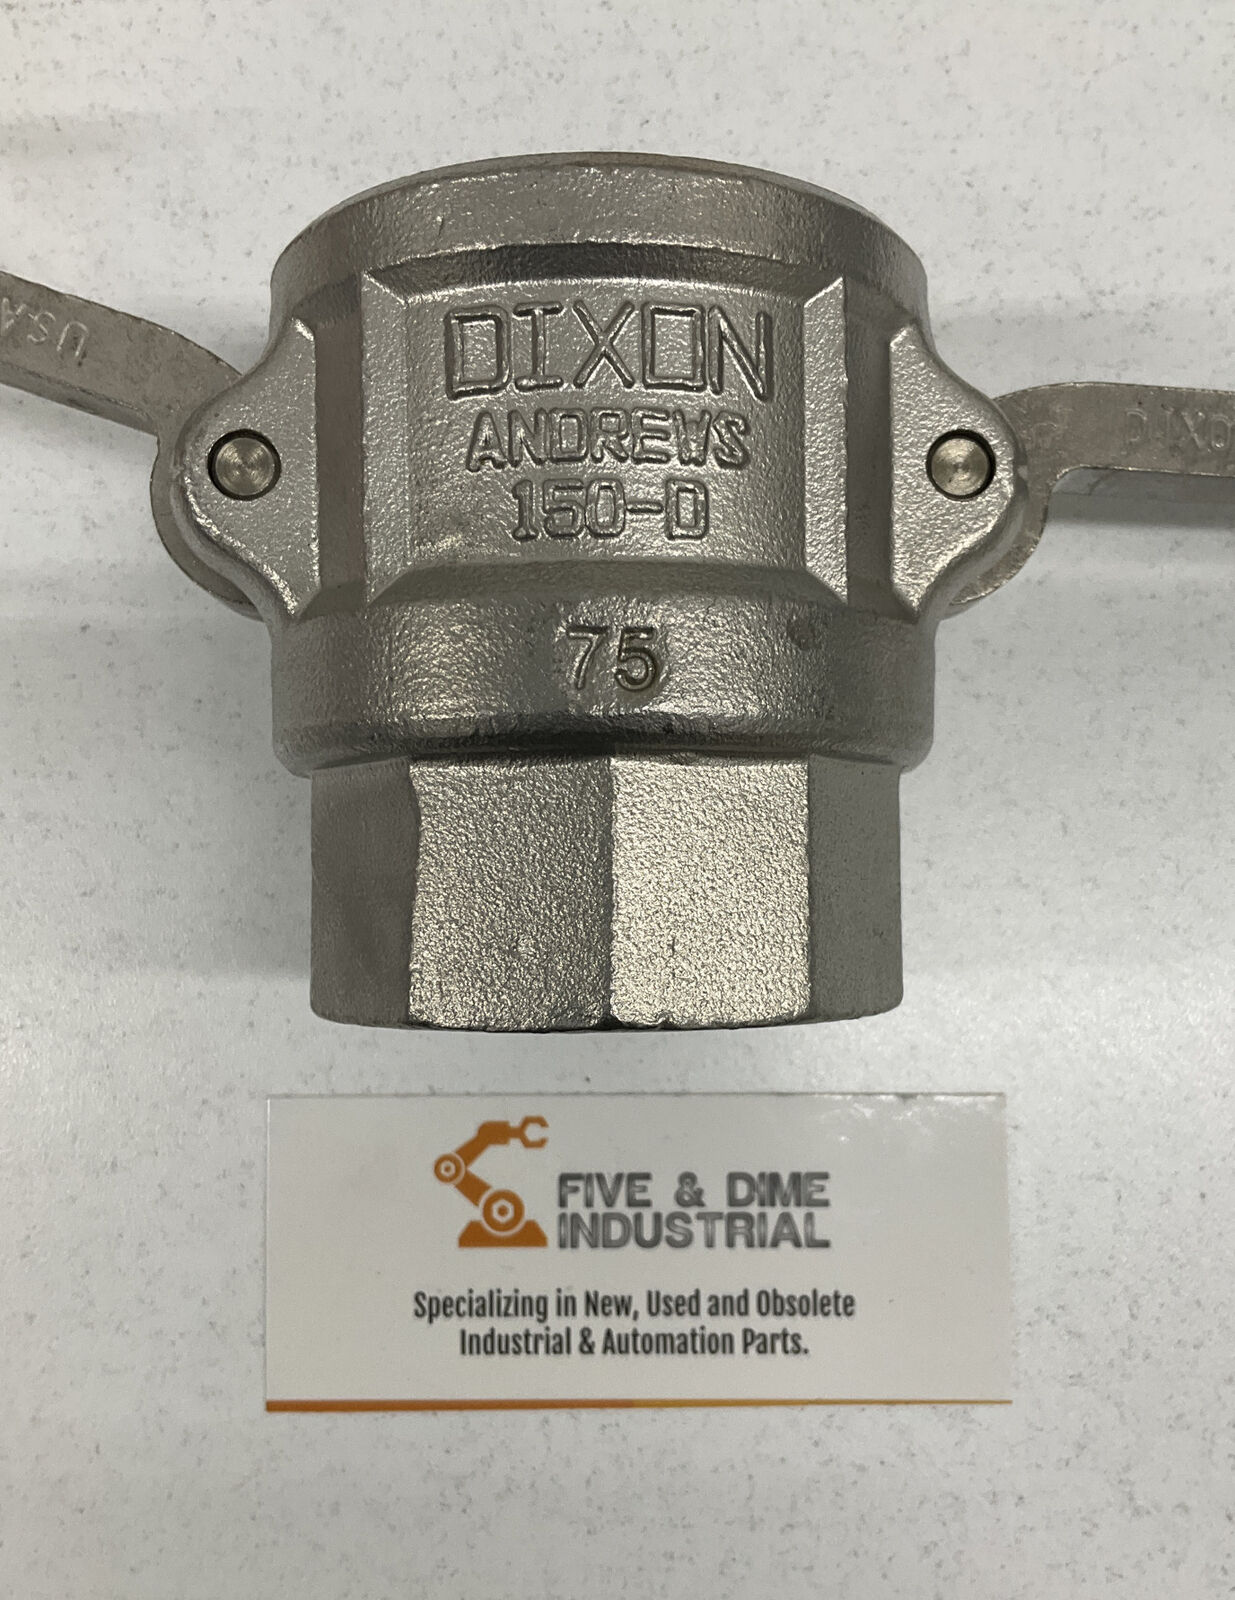 Dixon Andrews 1-1/2" Stainless Steel Coupler DXV-150-DL-SS  (RE241)